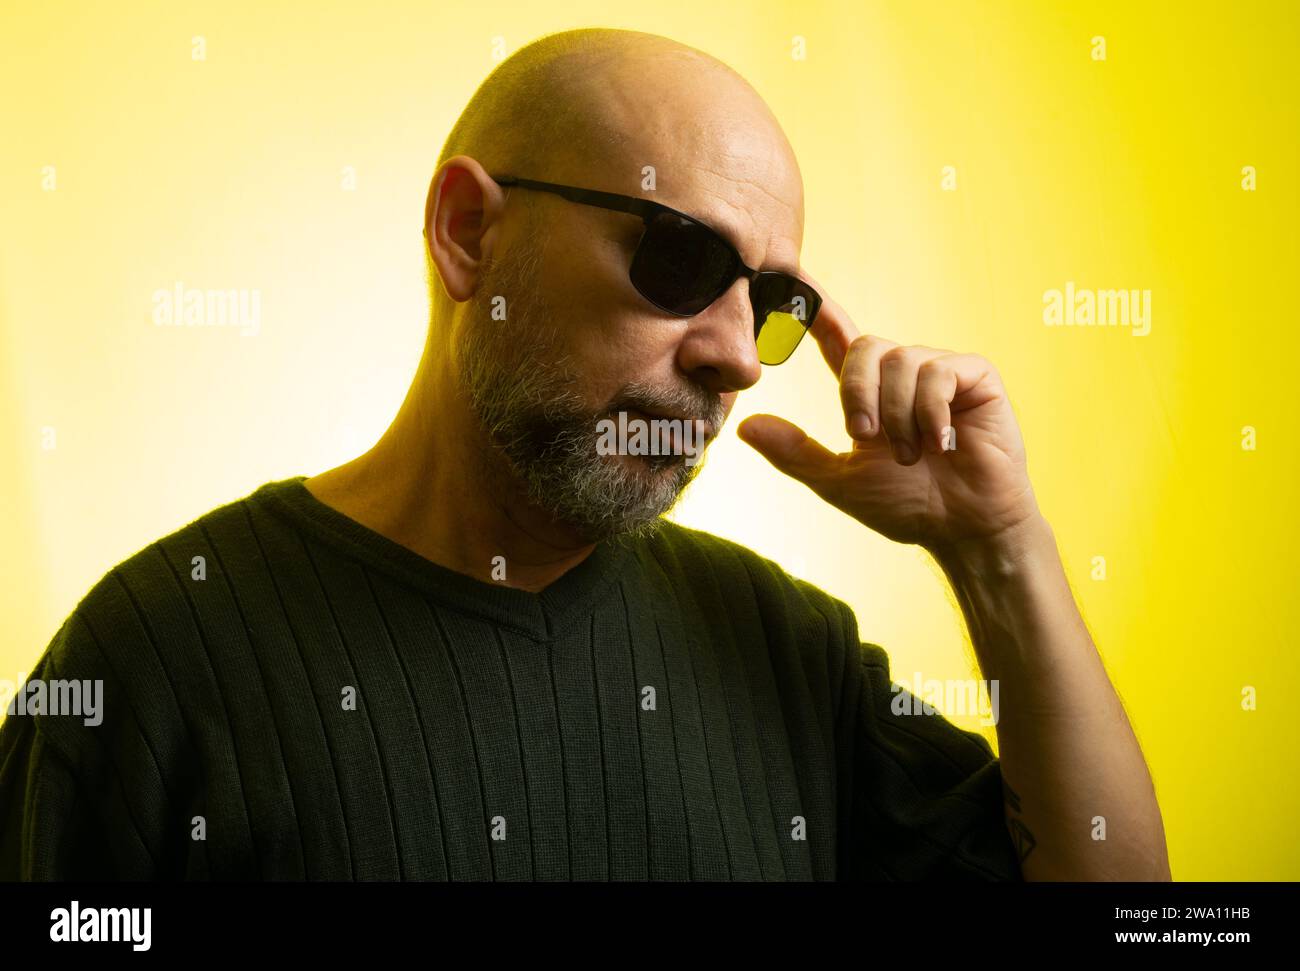 White man, bald, wearing sunglasses, serious and thoughtful. Isolated on yellow background. Stock Photo